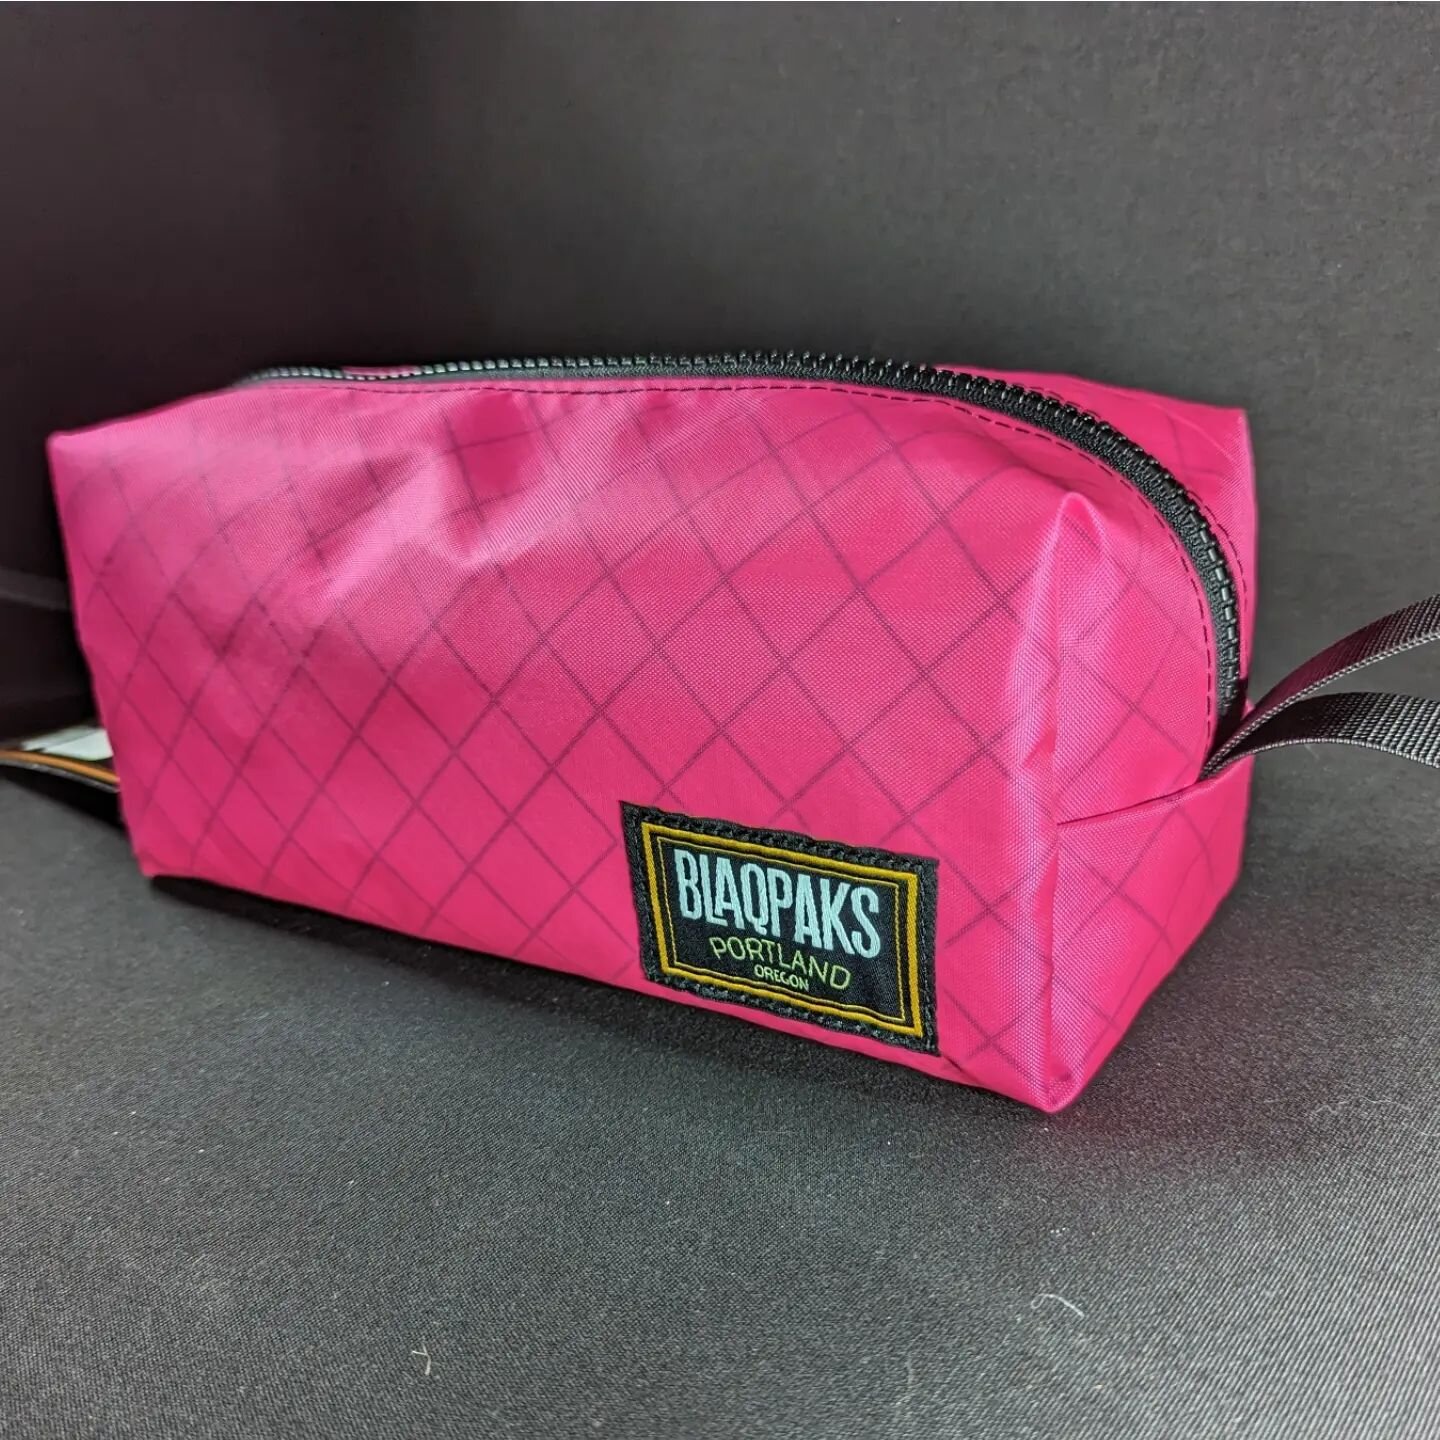 We added a new color Dopp Kit to the website! Fully waterproof and now available in pink for your travel needs.
.
#blaqpaks #handmadeinportland #guaranteedforlife #pink #doppkit #travelbag #toiletrybag #handmade